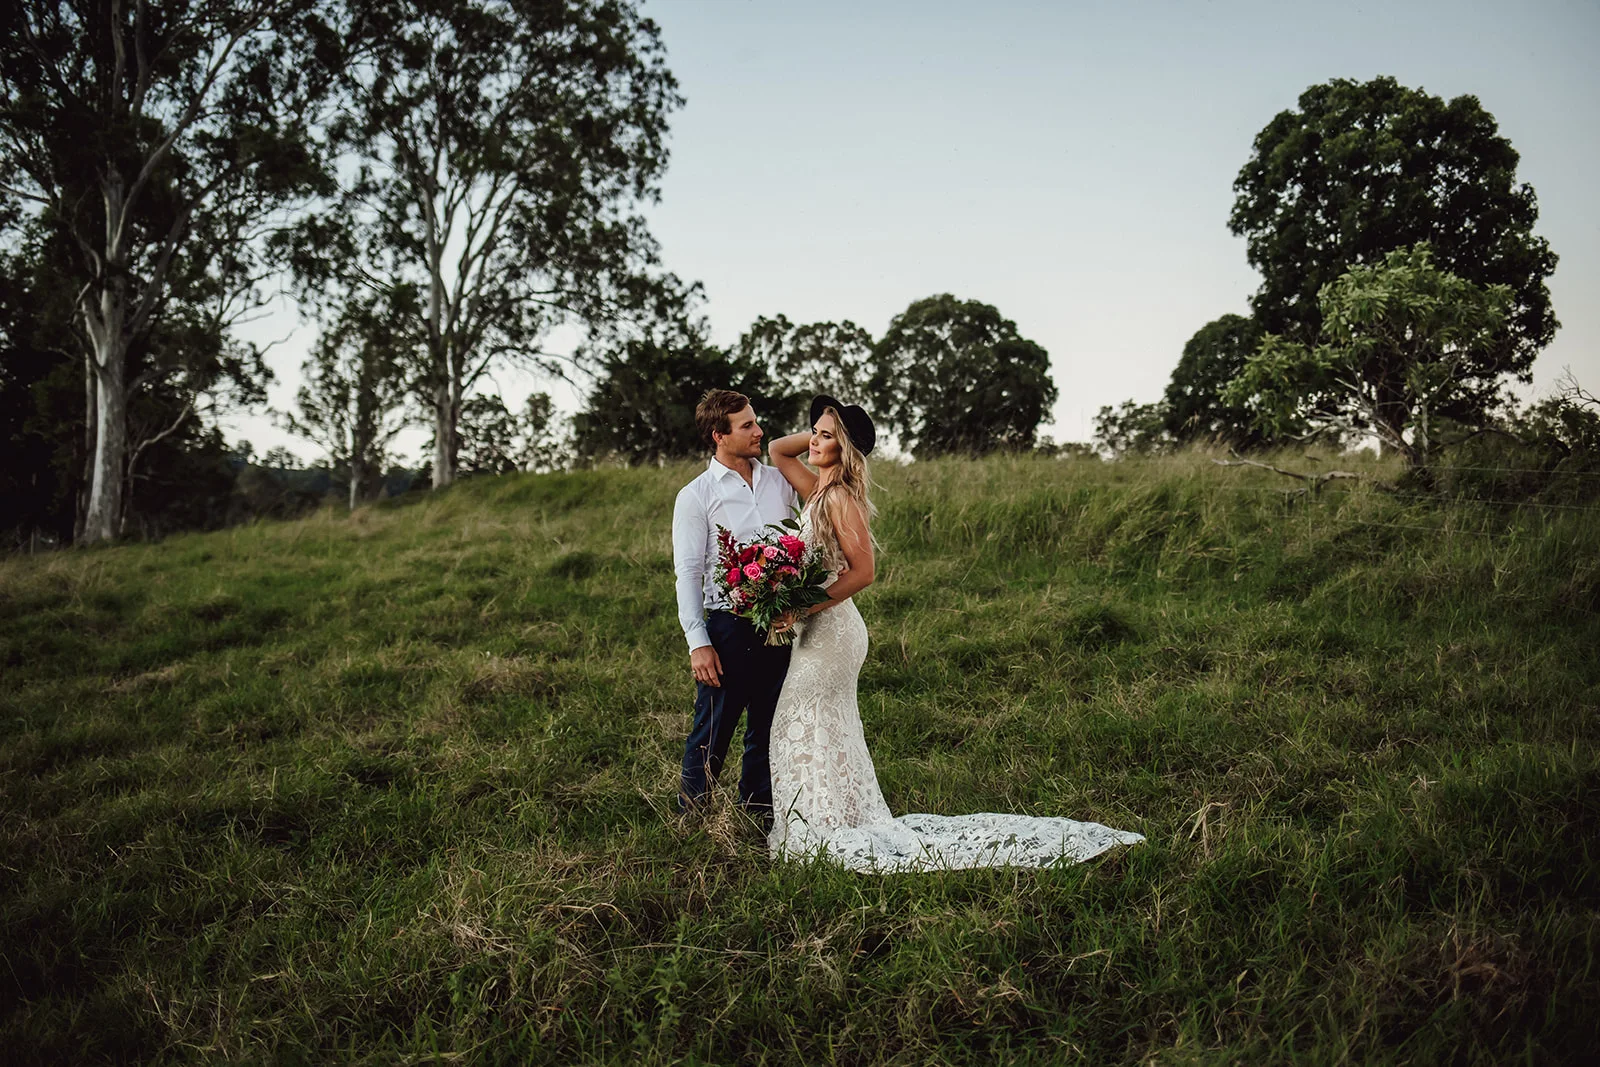 images by sonny love photography weddings brisbane floral design bridal gown groom suit boho country wedding inspiration